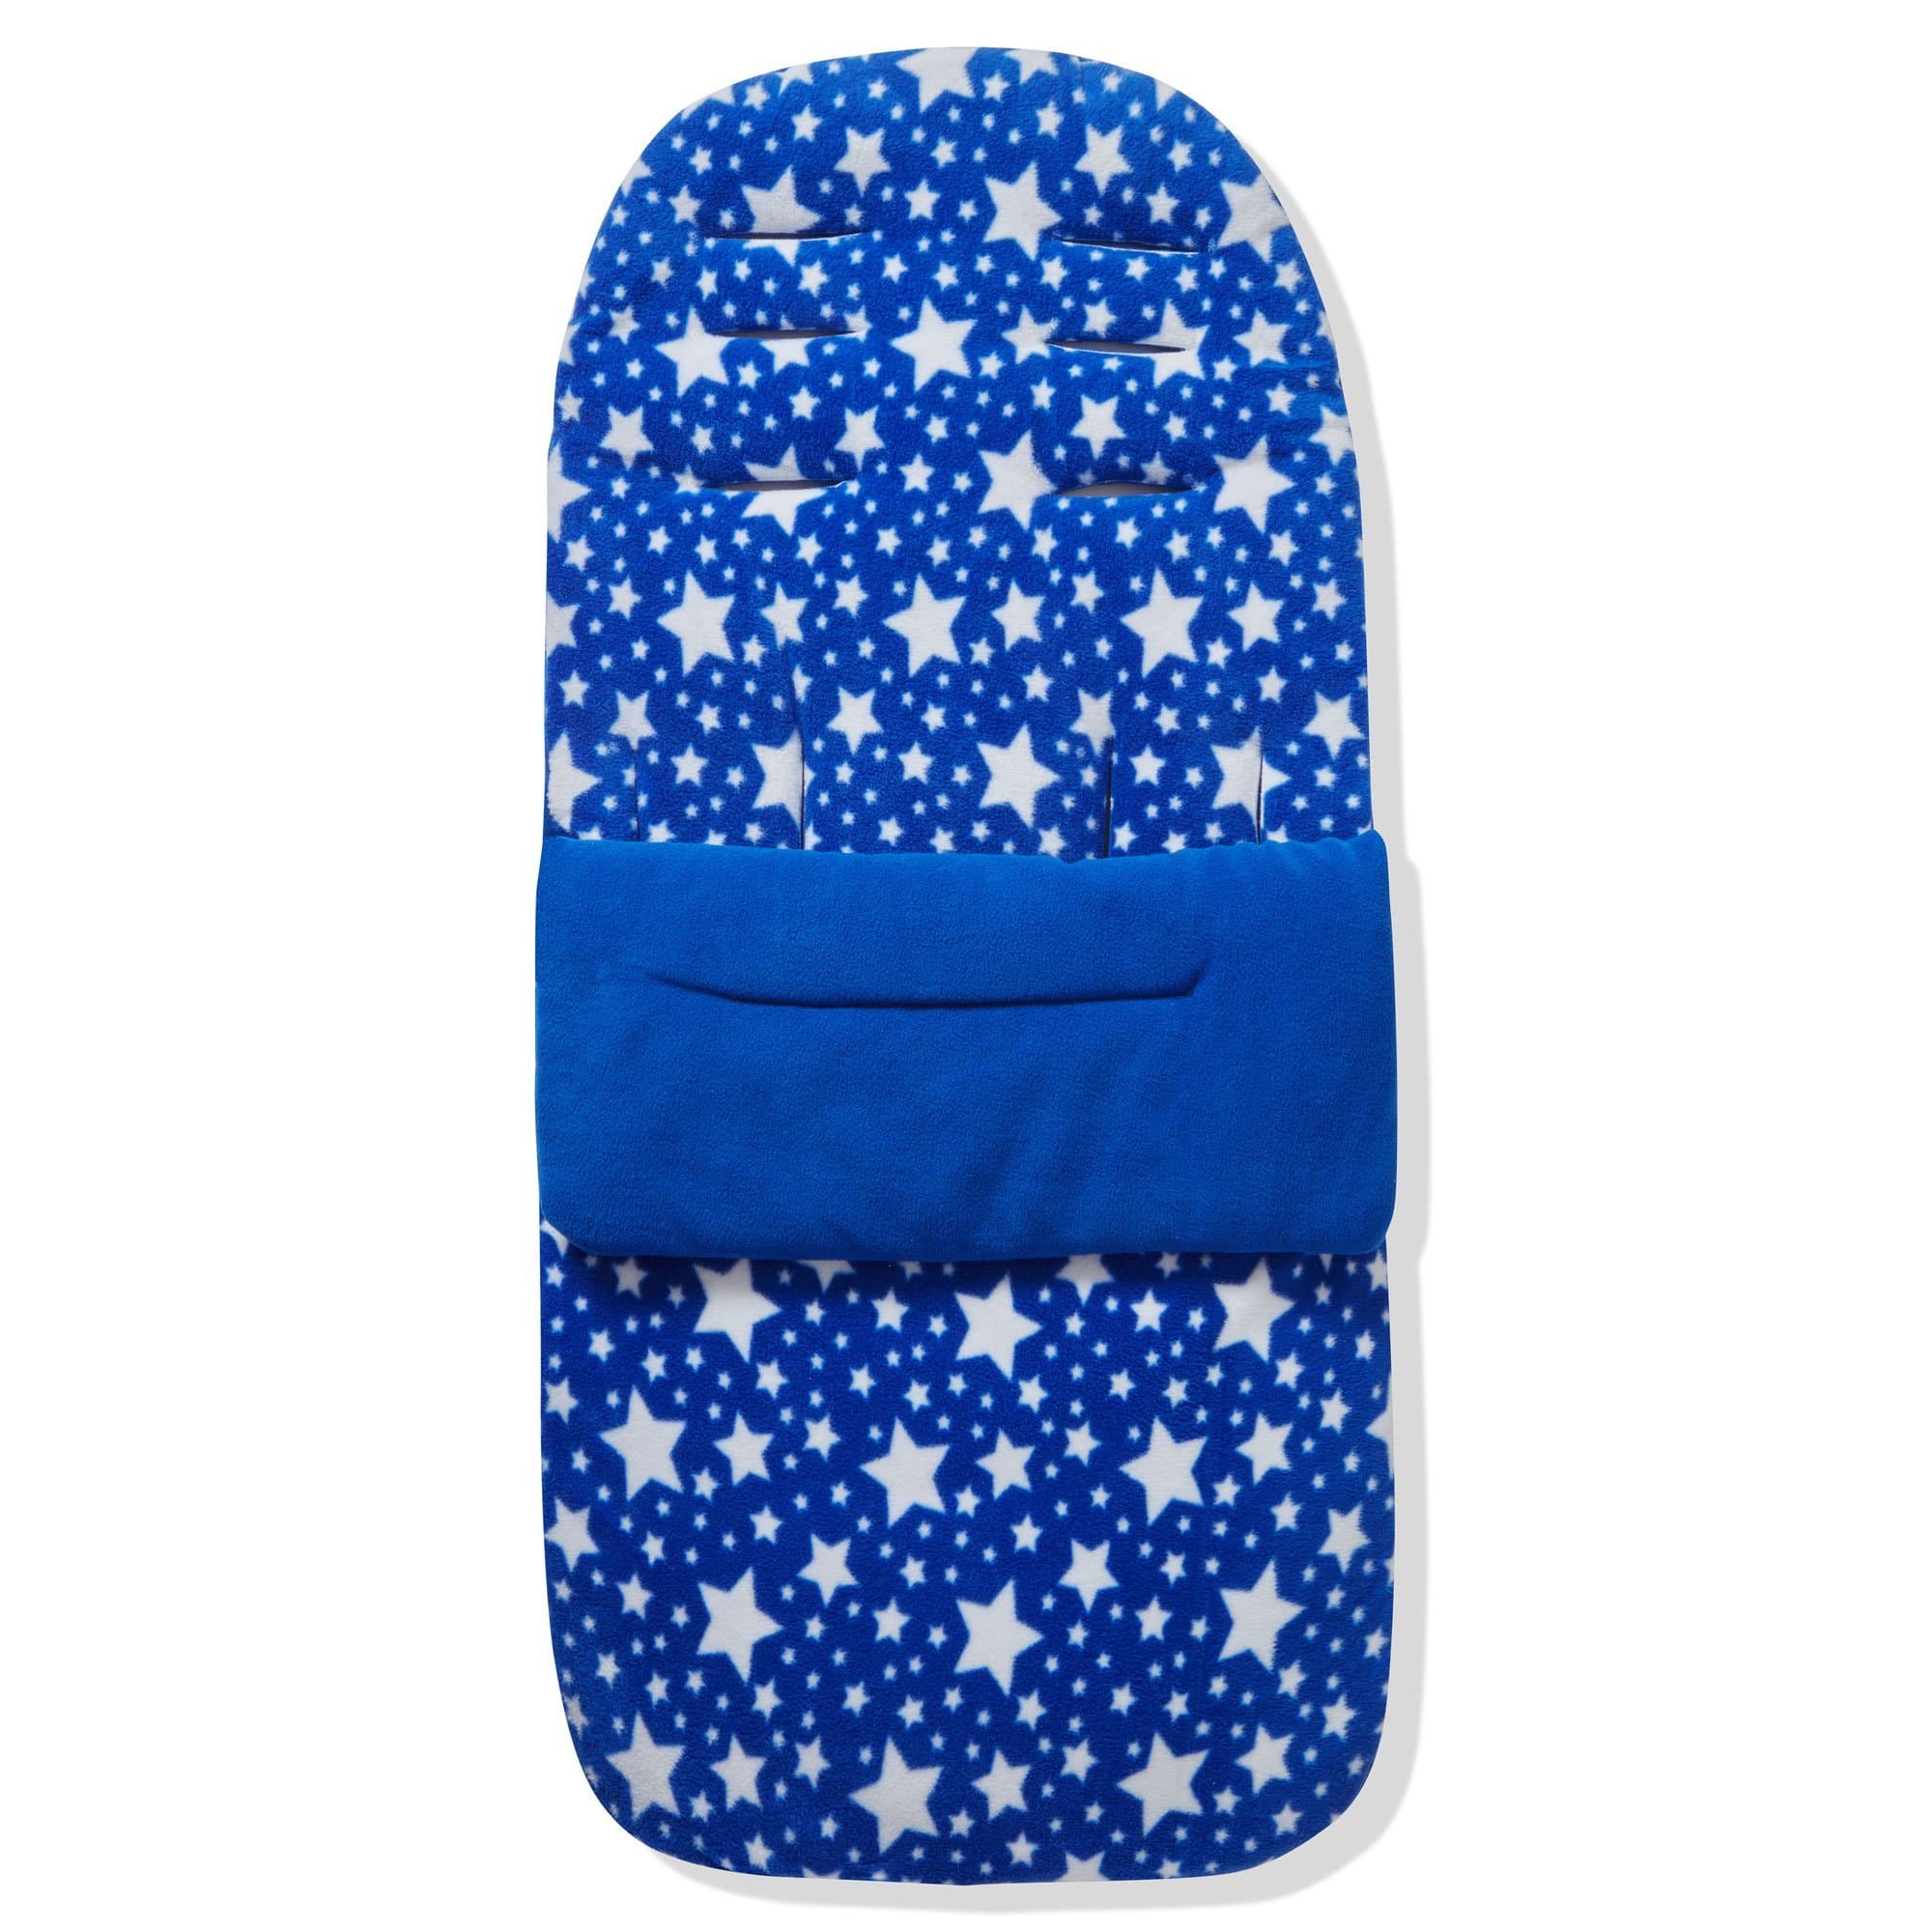 Fleece Footmuff / Cosy Toes Compatible with Looping - Blue Star / Fits All Models | For Your Little One